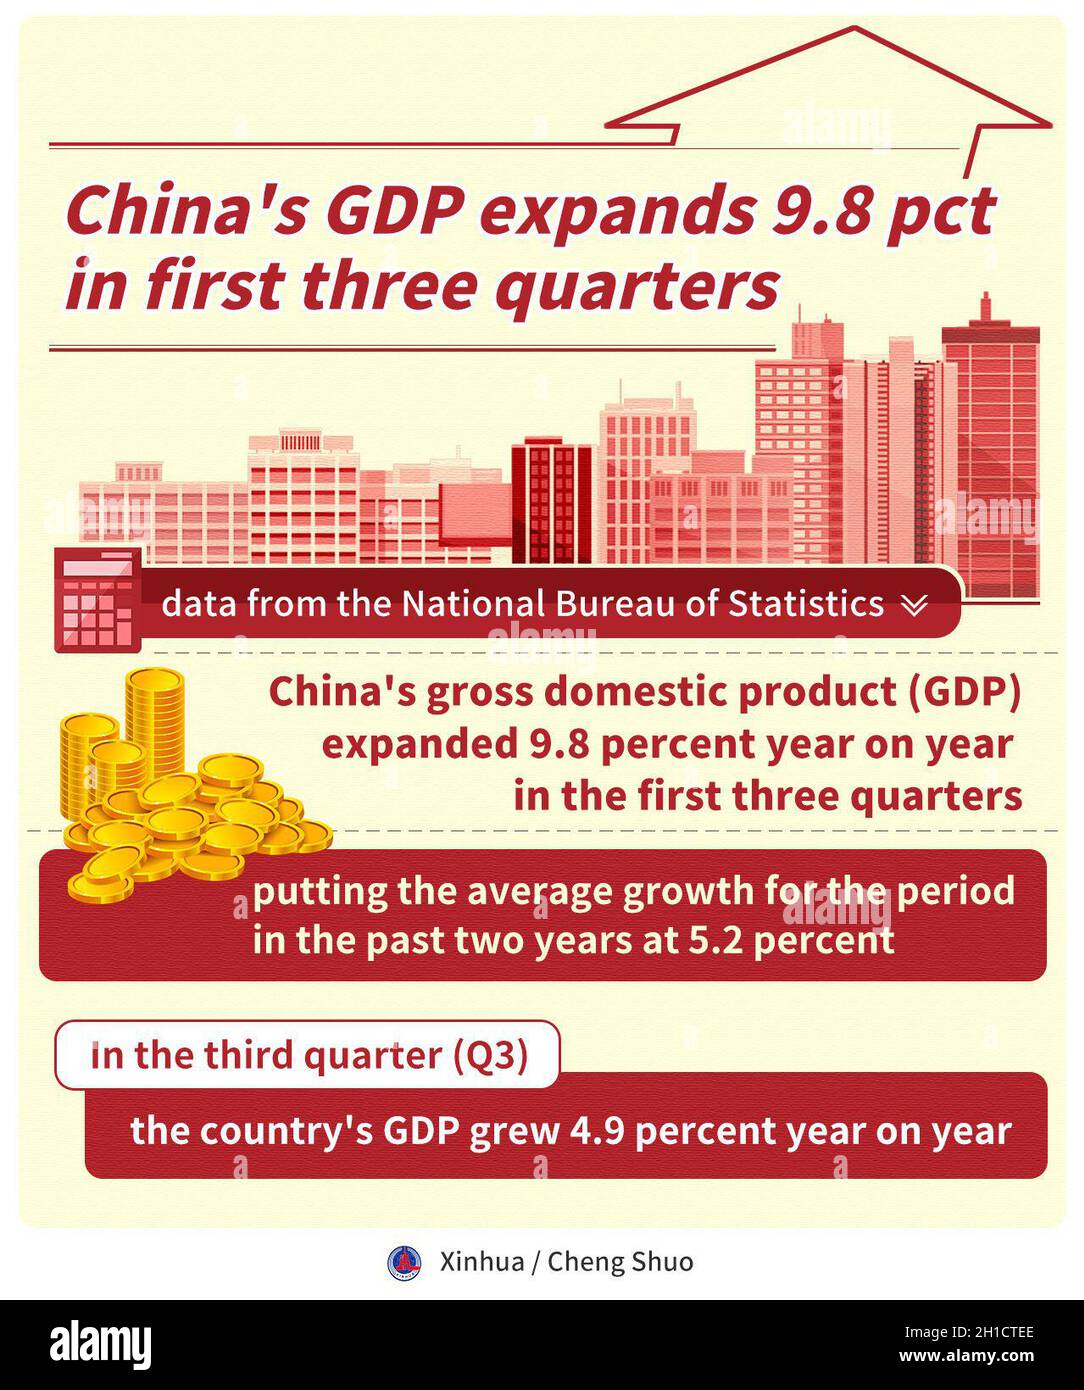 Beijing, China. 18th Oct, 2021. China's gross domestic product (GDP) expanded 9.8 percent year on year in the first three quarters, putting the average growth for the period in the past two years at 5.2 percent, data from the National Bureau of Statistics (NBS) showed Monday. In the third quarter (Q3), the country's GDP grew 4.9 percent year on year, slower than the growth of 18.3 percent in Q1 and 7.9 percent in Q2. Credit: Cheng Shuo/Xinhua/Alamy Live News Stock Photo